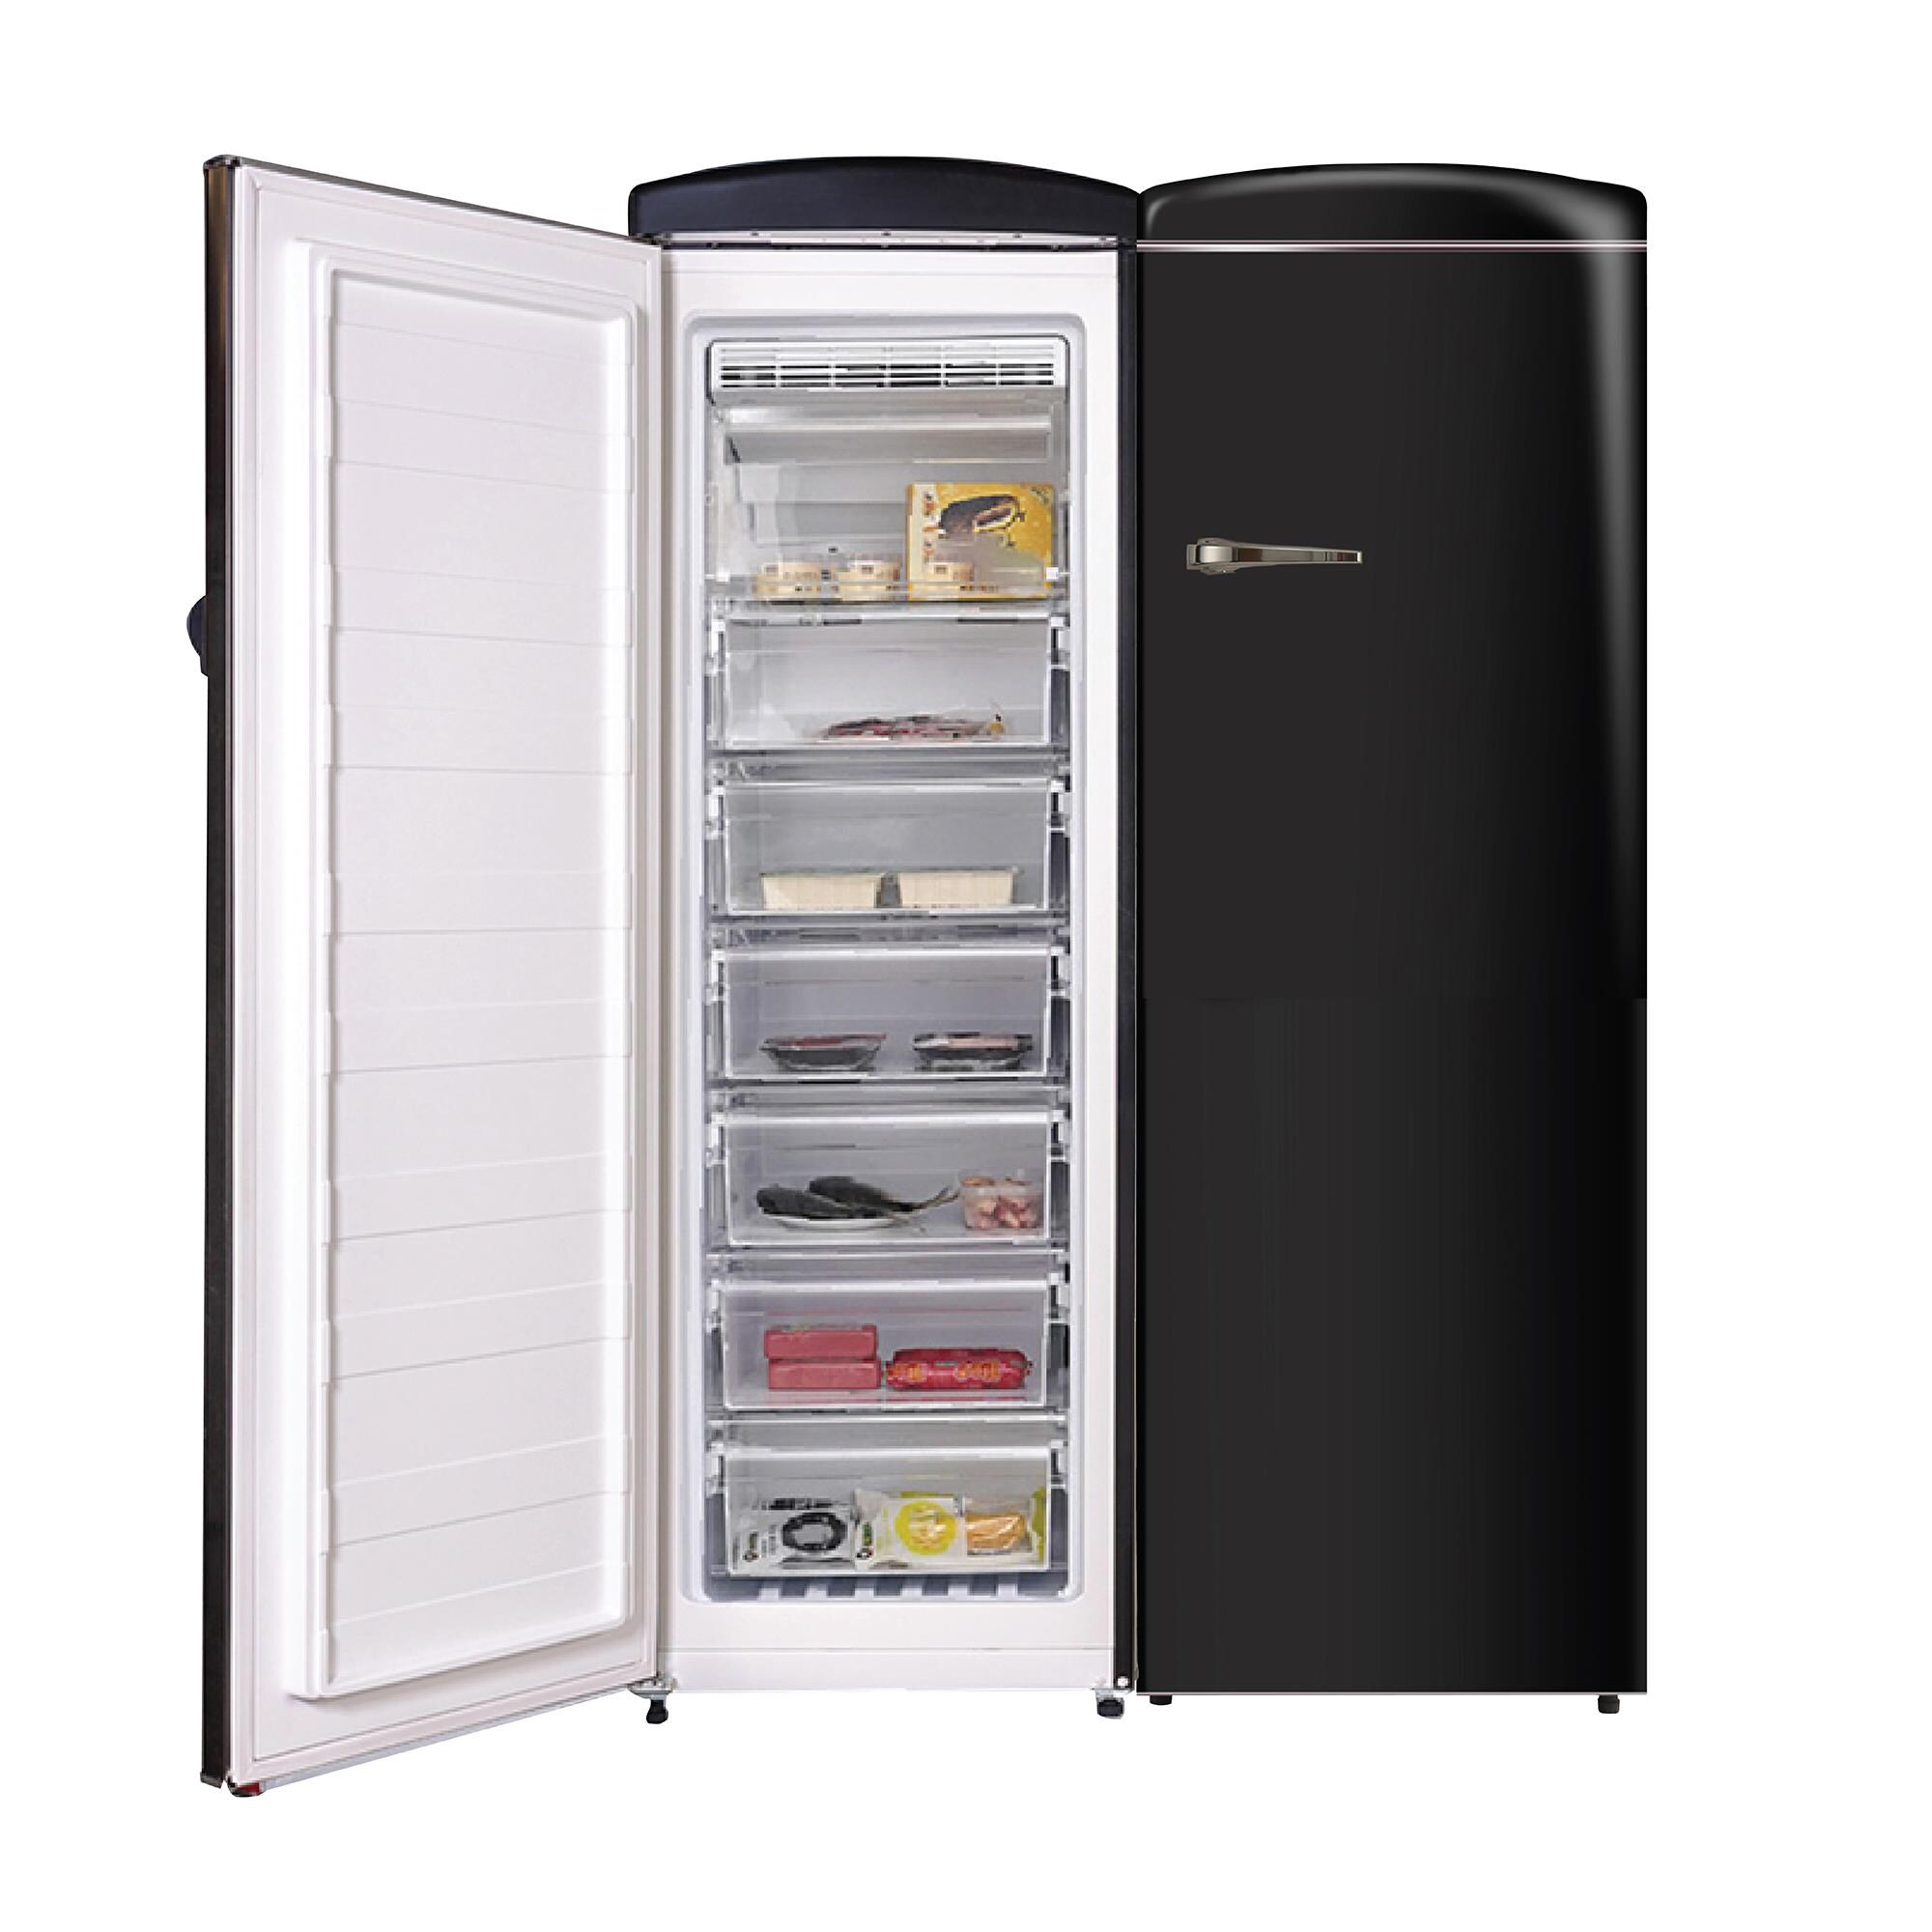 Marvel MPRO48SSSS 48 Inch Built-in Side by Side Refrigerator with 32.5 cu.  ft. Capacity, Stainless Steel Framed Glass Shelves, Ice Maker, Pro Handles  and Stainless Steel Toe Kick: Stainless Steel, Stainless Steel